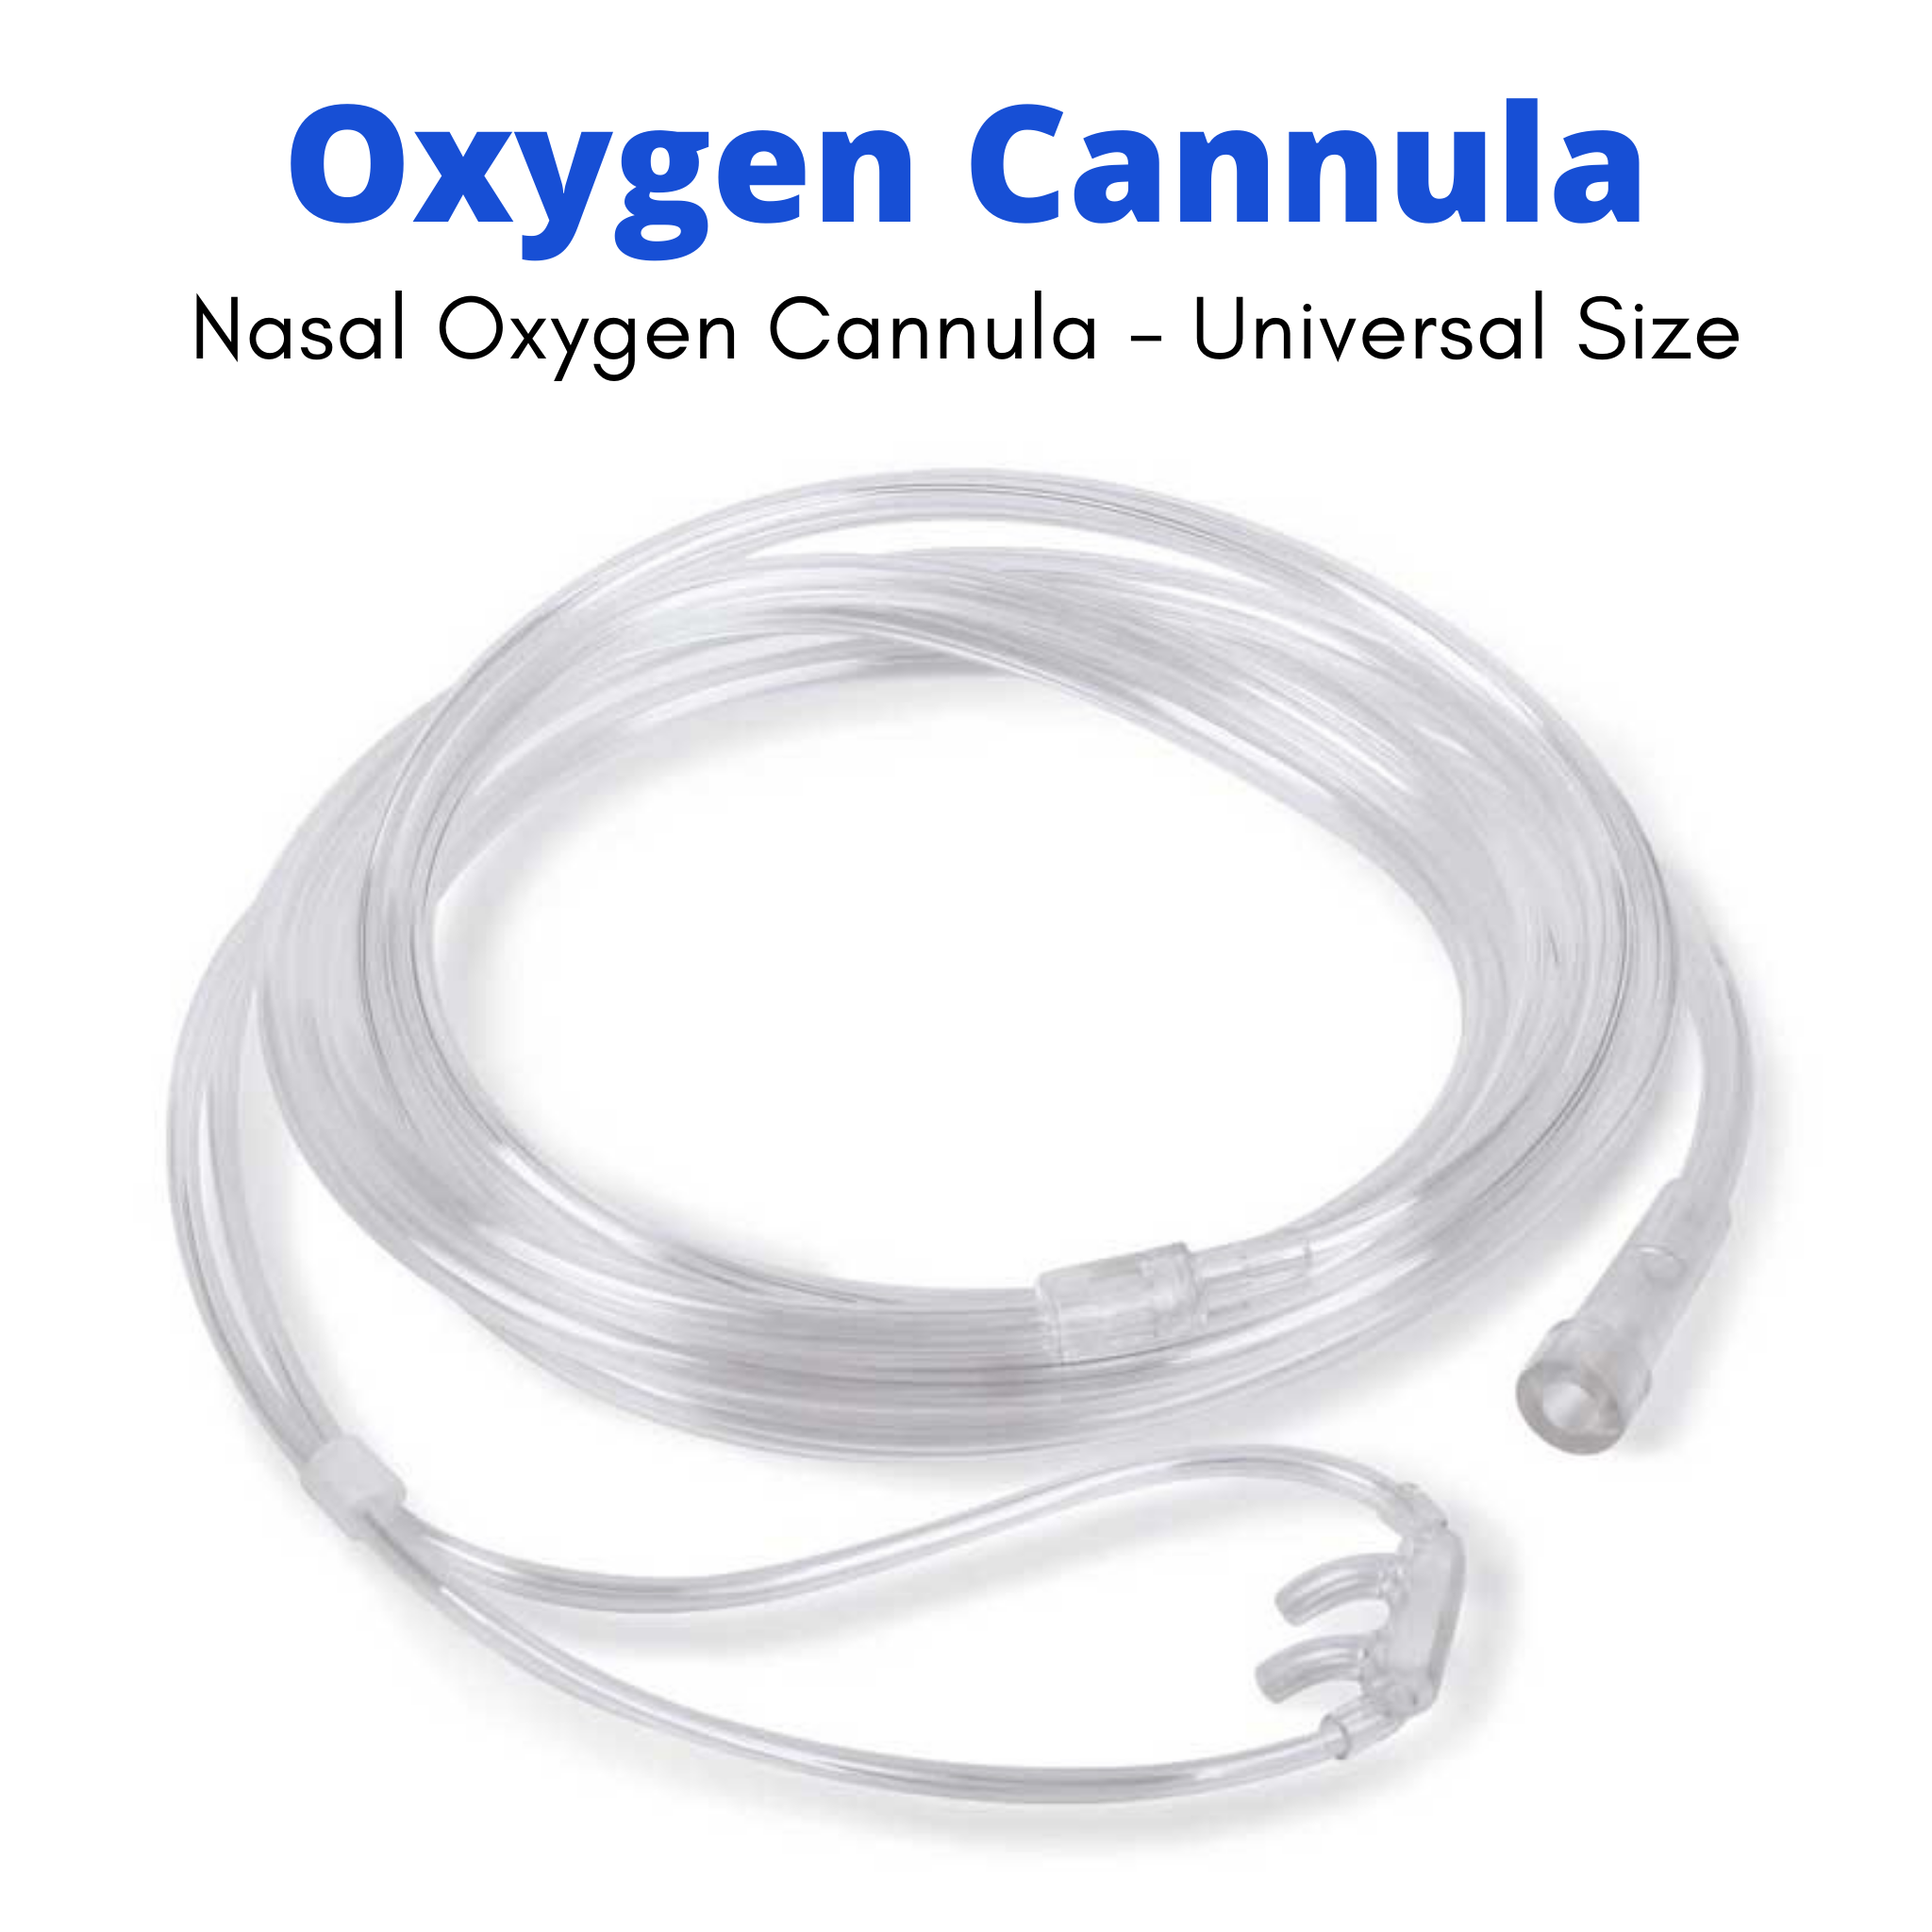 Medline Oxygen Nasal Cannulas HCSU4514S comes with Universal Connector at Best Price in India Only From AeonCare